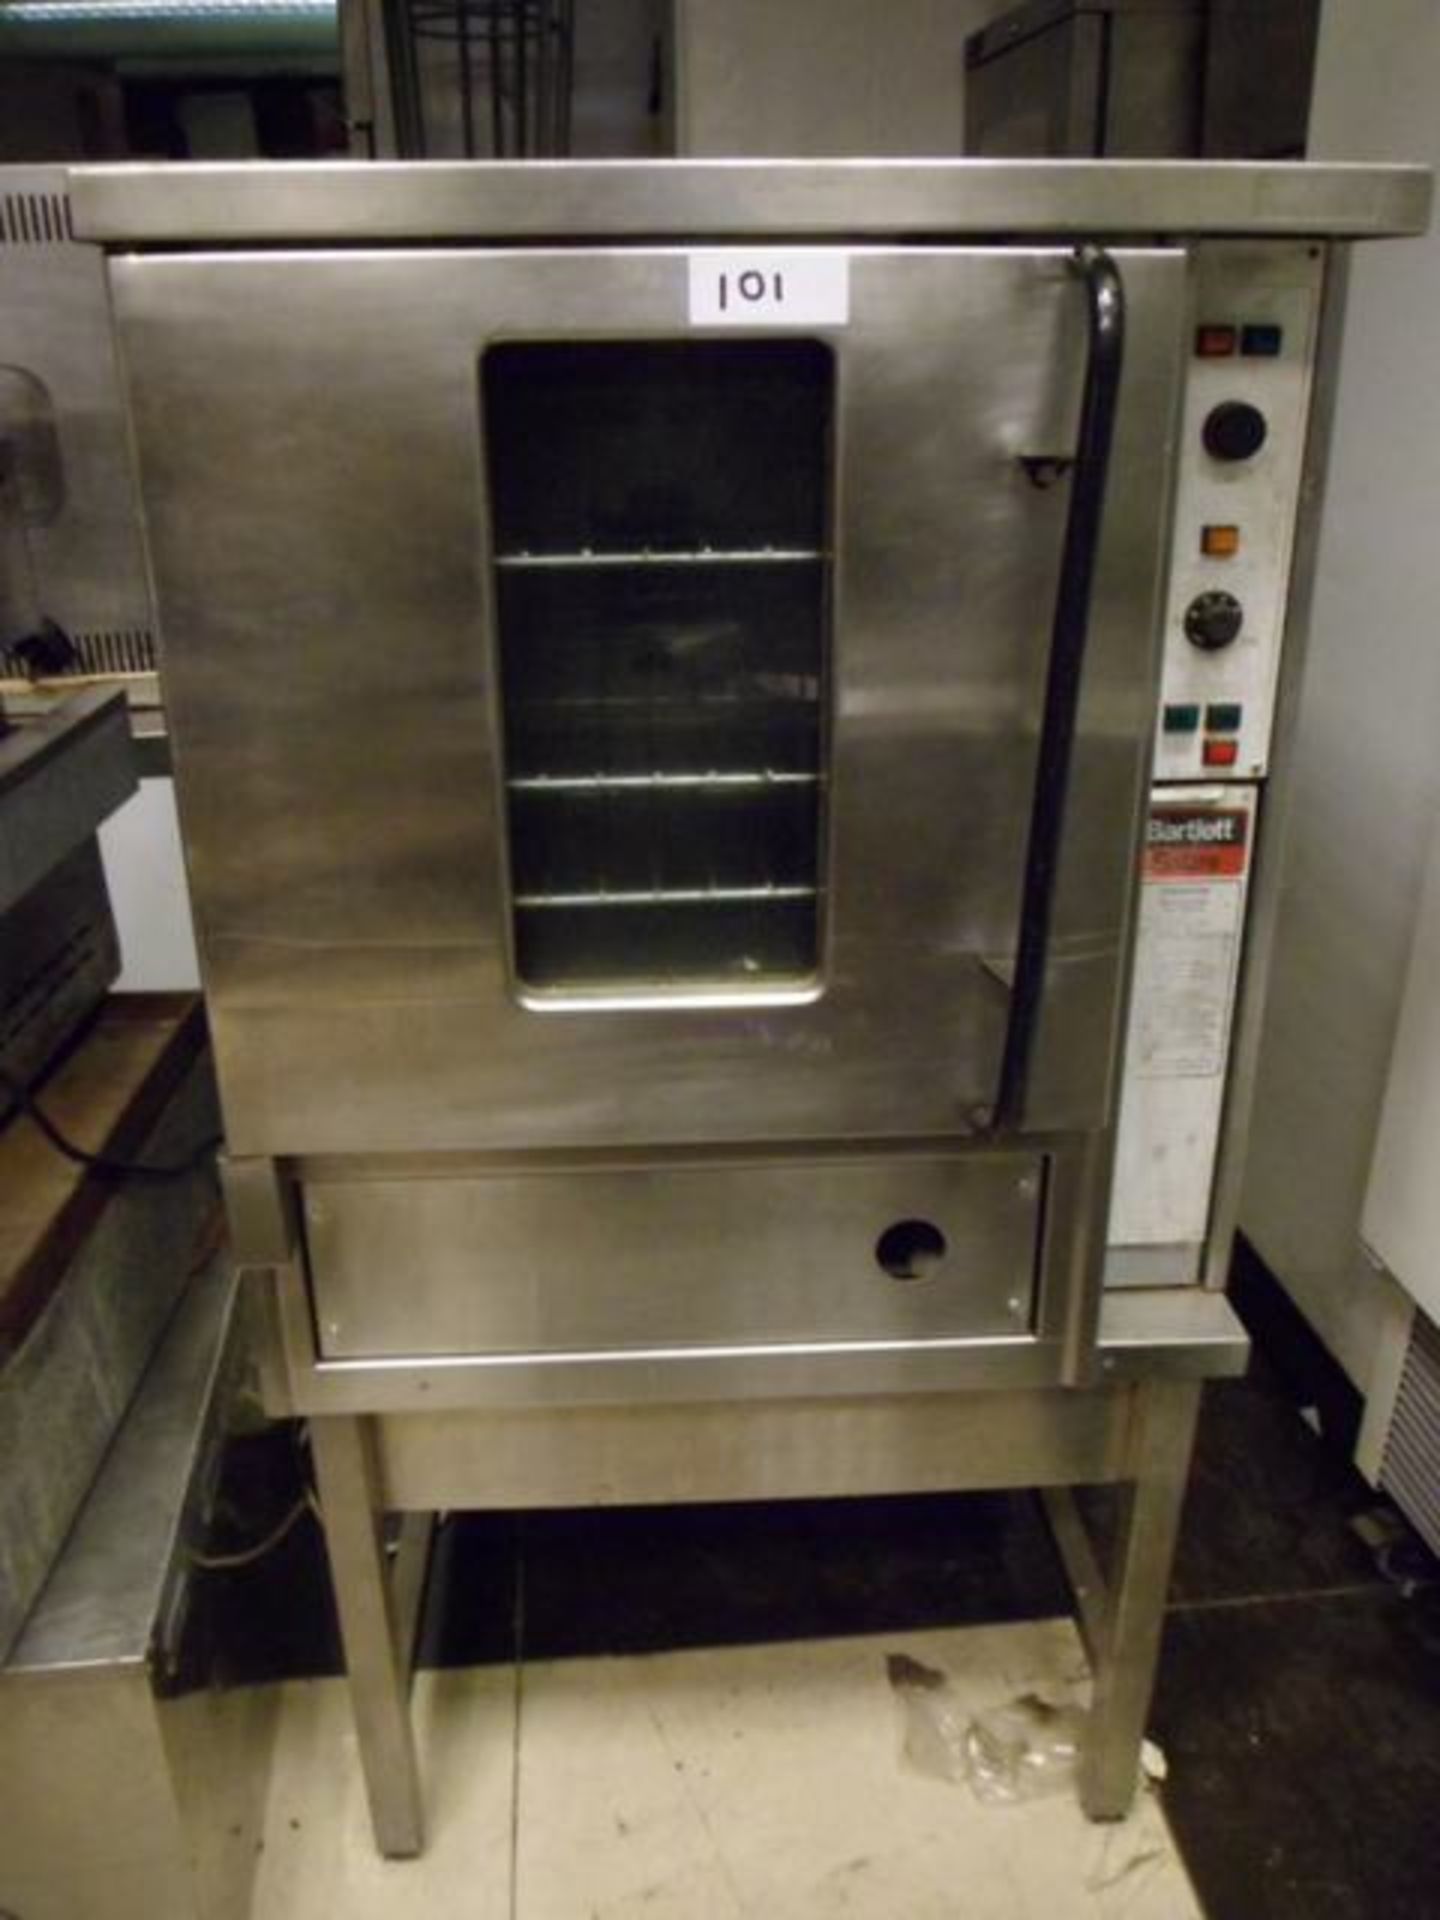 Bartlett Sabre E16G gas convection oven with stand 770mm x 800mm x 1370mm (s/n T16521)